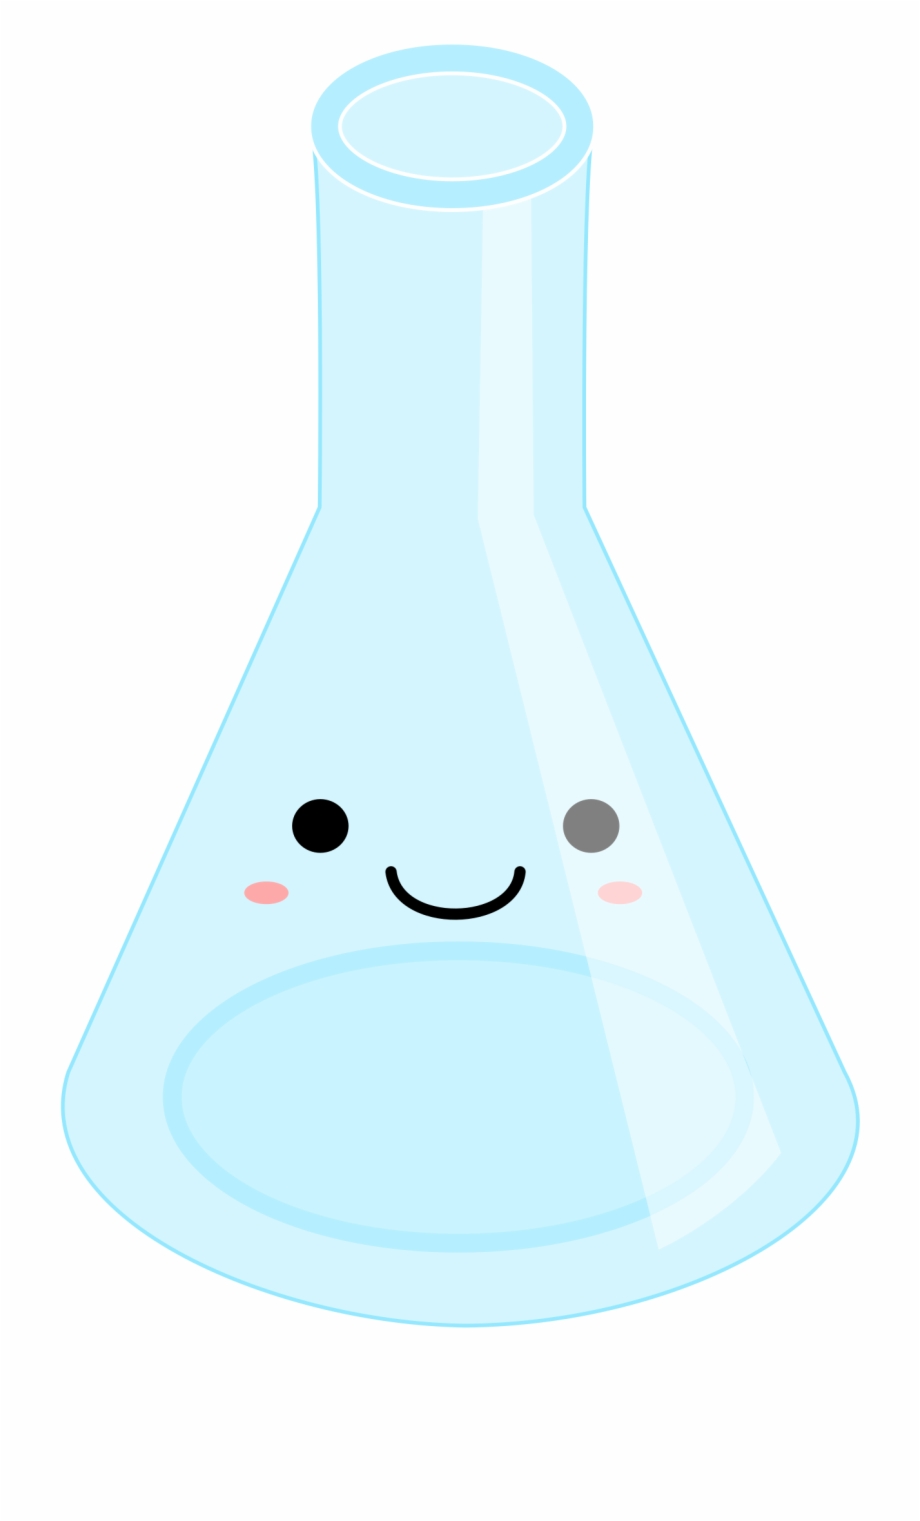 This Free Icons Png Design Of Kawaii Erlenmeyer Flask